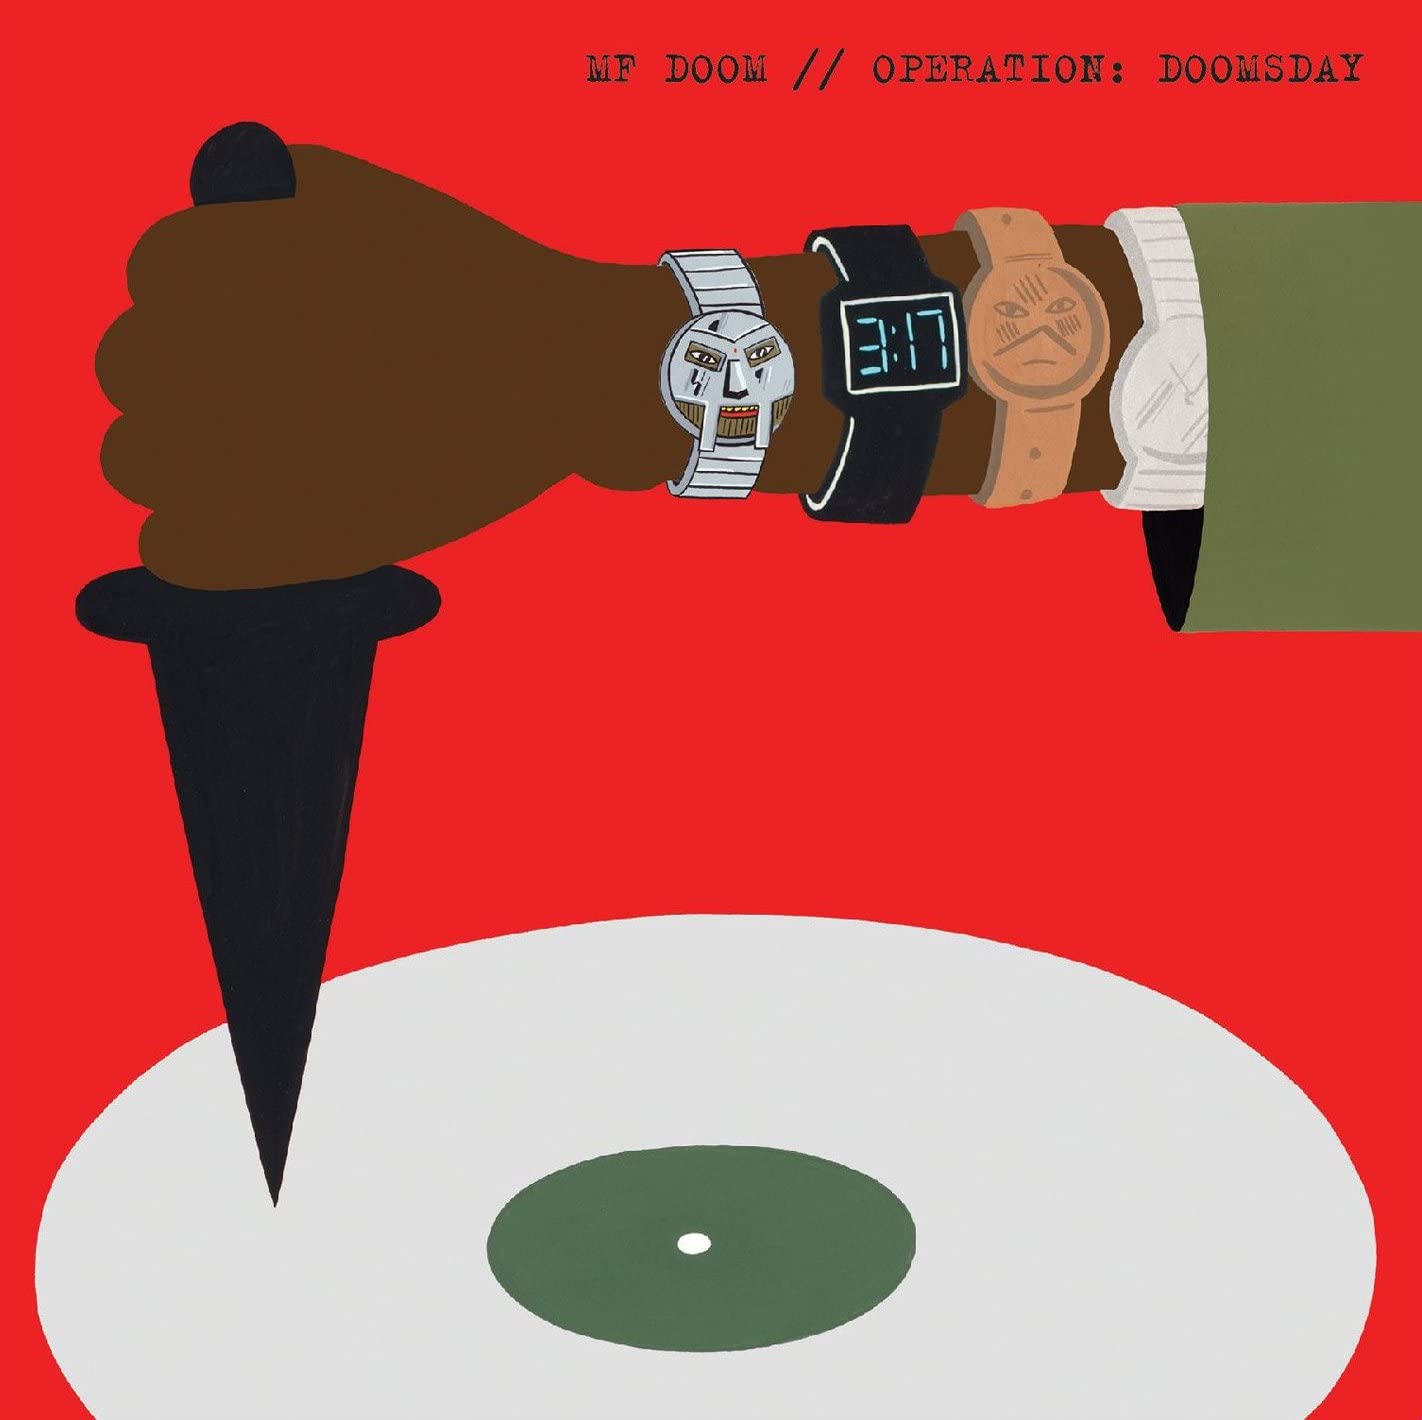 MF DOOM - OPERATION: DOOMSDAY (The Complete, Remastered, Expanded CD 2-Disc Set - 42 Tracks)